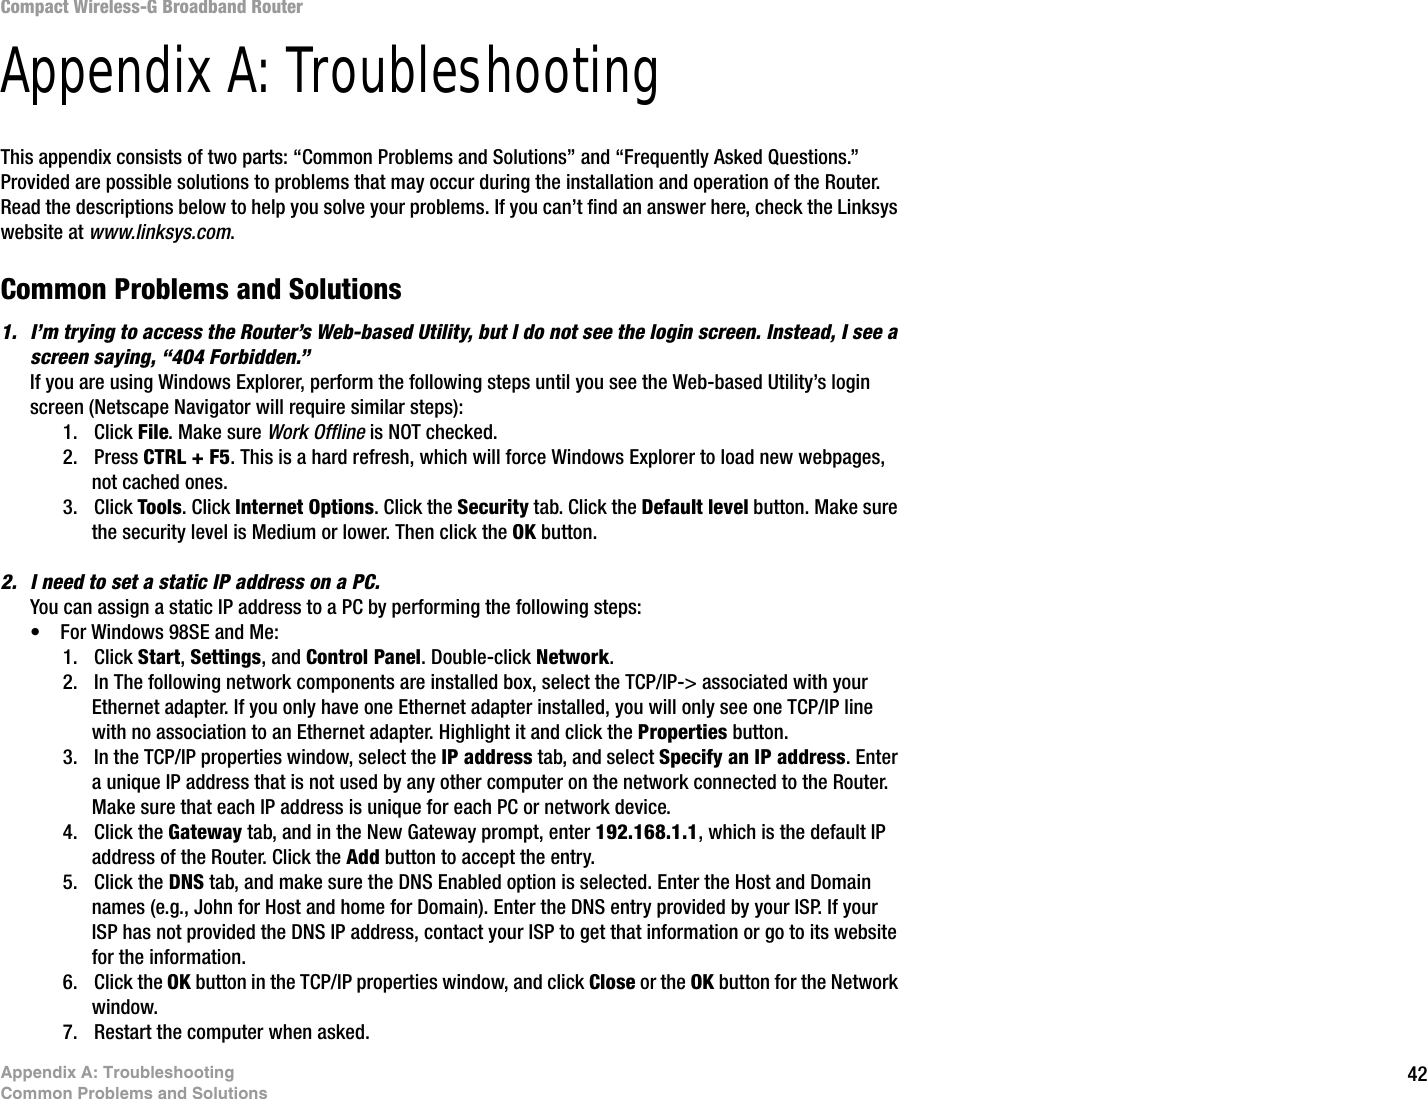 42Appendix A: TroubleshootingCommon Problems and SolutionsCompact Wireless-G Broadband RouterAppendix A: TroubleshootingThis appendix consists of two parts: “Common Problems and Solutions” and “Frequently Asked Questions.” Provided are possible solutions to problems that may occur during the installation and operation of the Router. Read the descriptions below to help you solve your problems. If you can’t find an answer here, check the Linksys website at www.linksys.com.Common Problems and Solutions1. I’m trying to access the Router’s Web-based Utility, but I do not see the login screen. Instead, I see a screen saying, “404 Forbidden.”If you are using Windows Explorer, perform the following steps until you see the Web-based Utility’s login screen (Netscape Navigator will require similar steps):1. Click File. Make sure Work Offline is NOT checked.2. Press CTRL + F5. This is a hard refresh, which will force Windows Explorer to load new webpages, not cached ones.3. Click Tools. Click Internet Options. Click the Security tab. Click the Default level button. Make sure the security level is Medium or lower. Then click the OK button.2. I need to set a static IP address on a PC.You can assign a static IP address to a PC by performing the following steps:• For Windows 98SE and Me:1. Click Start, Settings, and Control Panel. Double-click Network.2. In The following network components are installed box, select the TCP/IP-&gt; associated with your Ethernet adapter. If you only have one Ethernet adapter installed, you will only see one TCP/IP line with no association to an Ethernet adapter. Highlight it and click the Properties button.3. In the TCP/IP properties window, select the IP address tab, and select Specify an IP address. Enter a unique IP address that is not used by any other computer on the network connected to the Router. Make sure that each IP address is unique for each PC or network device.4. Click the Gateway tab, and in the New Gateway prompt, enter 192.168.1.1, which is the default IP address of the Router. Click the Add button to accept the entry.5. Click the DNS tab, and make sure the DNS Enabled option is selected. Enter the Host and Domain names (e.g., John for Host and home for Domain). Enter the DNS entry provided by your ISP. If your ISP has not provided the DNS IP address, contact your ISP to get that information or go to its website for the information.6. Click the OK button in the TCP/IP properties window, and click Close or the OK button for the Network window.7. Restart the computer when asked.